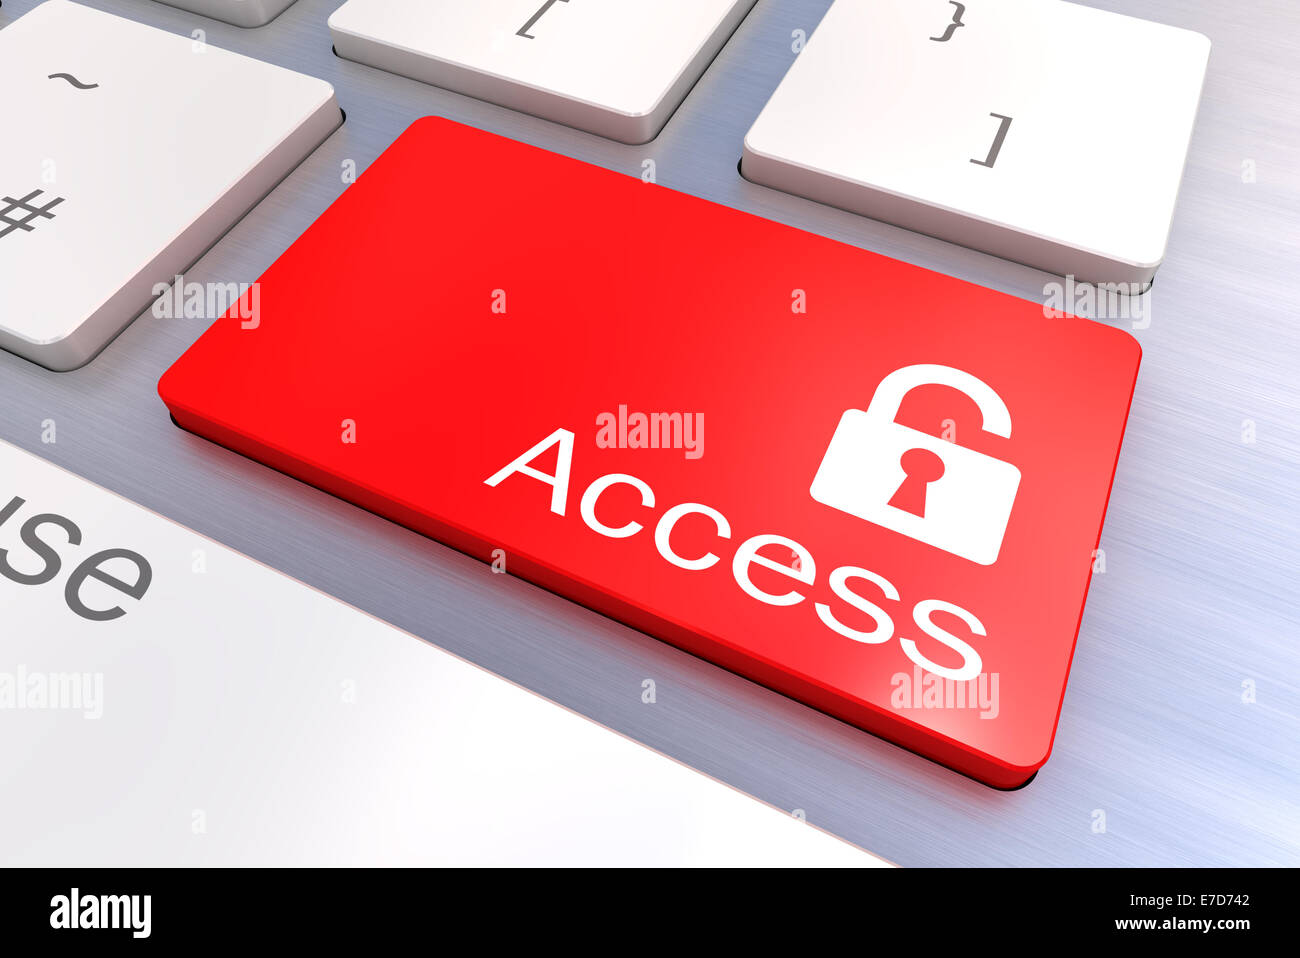 A Colourful 3d Rendered Illustration showing a Access Security concept on a Computer Keyboard Stock Photo